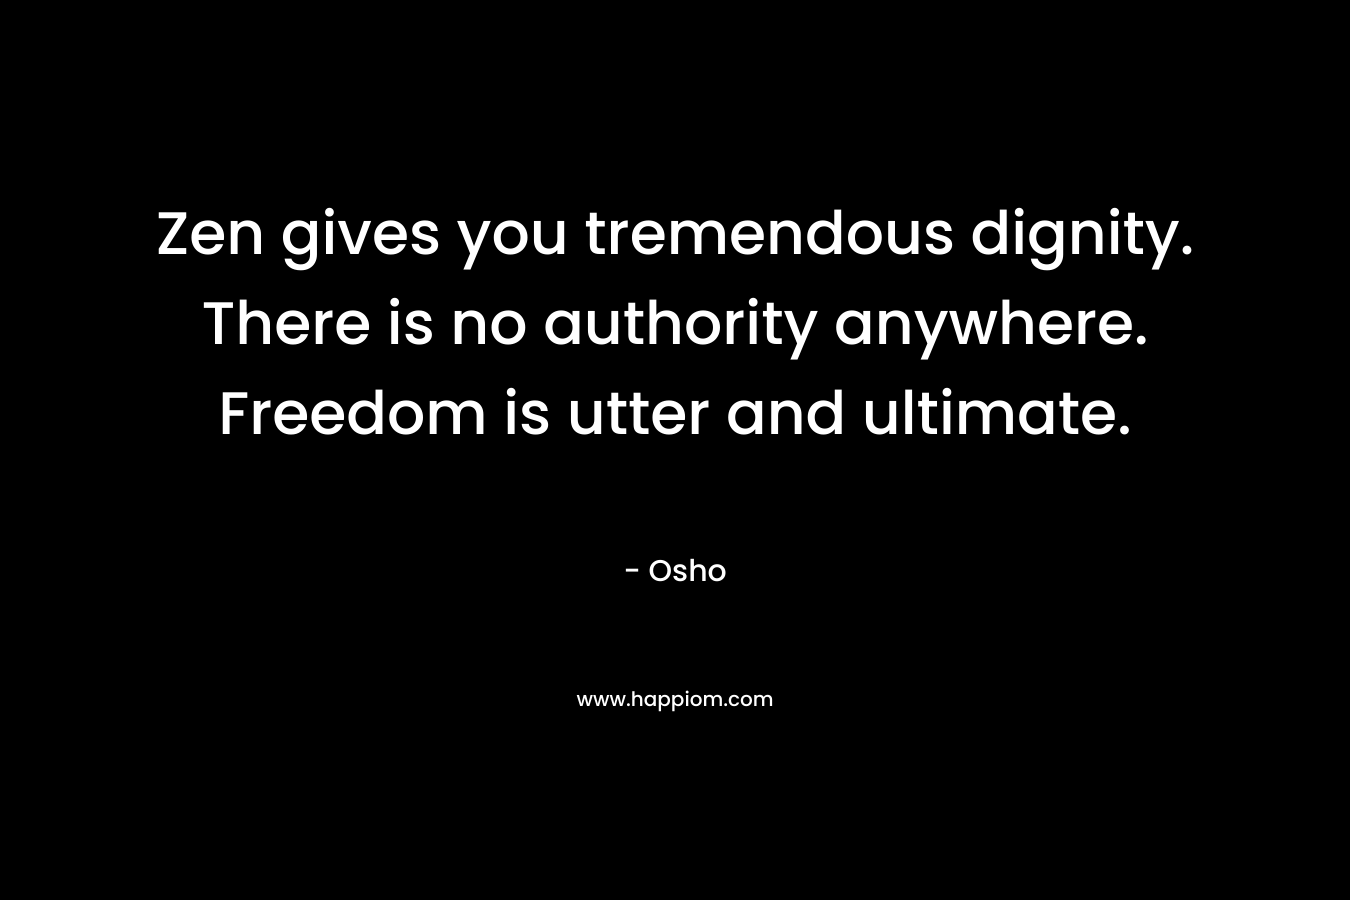 Zen gives you tremendous dignity. There is no authority anywhere. Freedom is utter and ultimate.